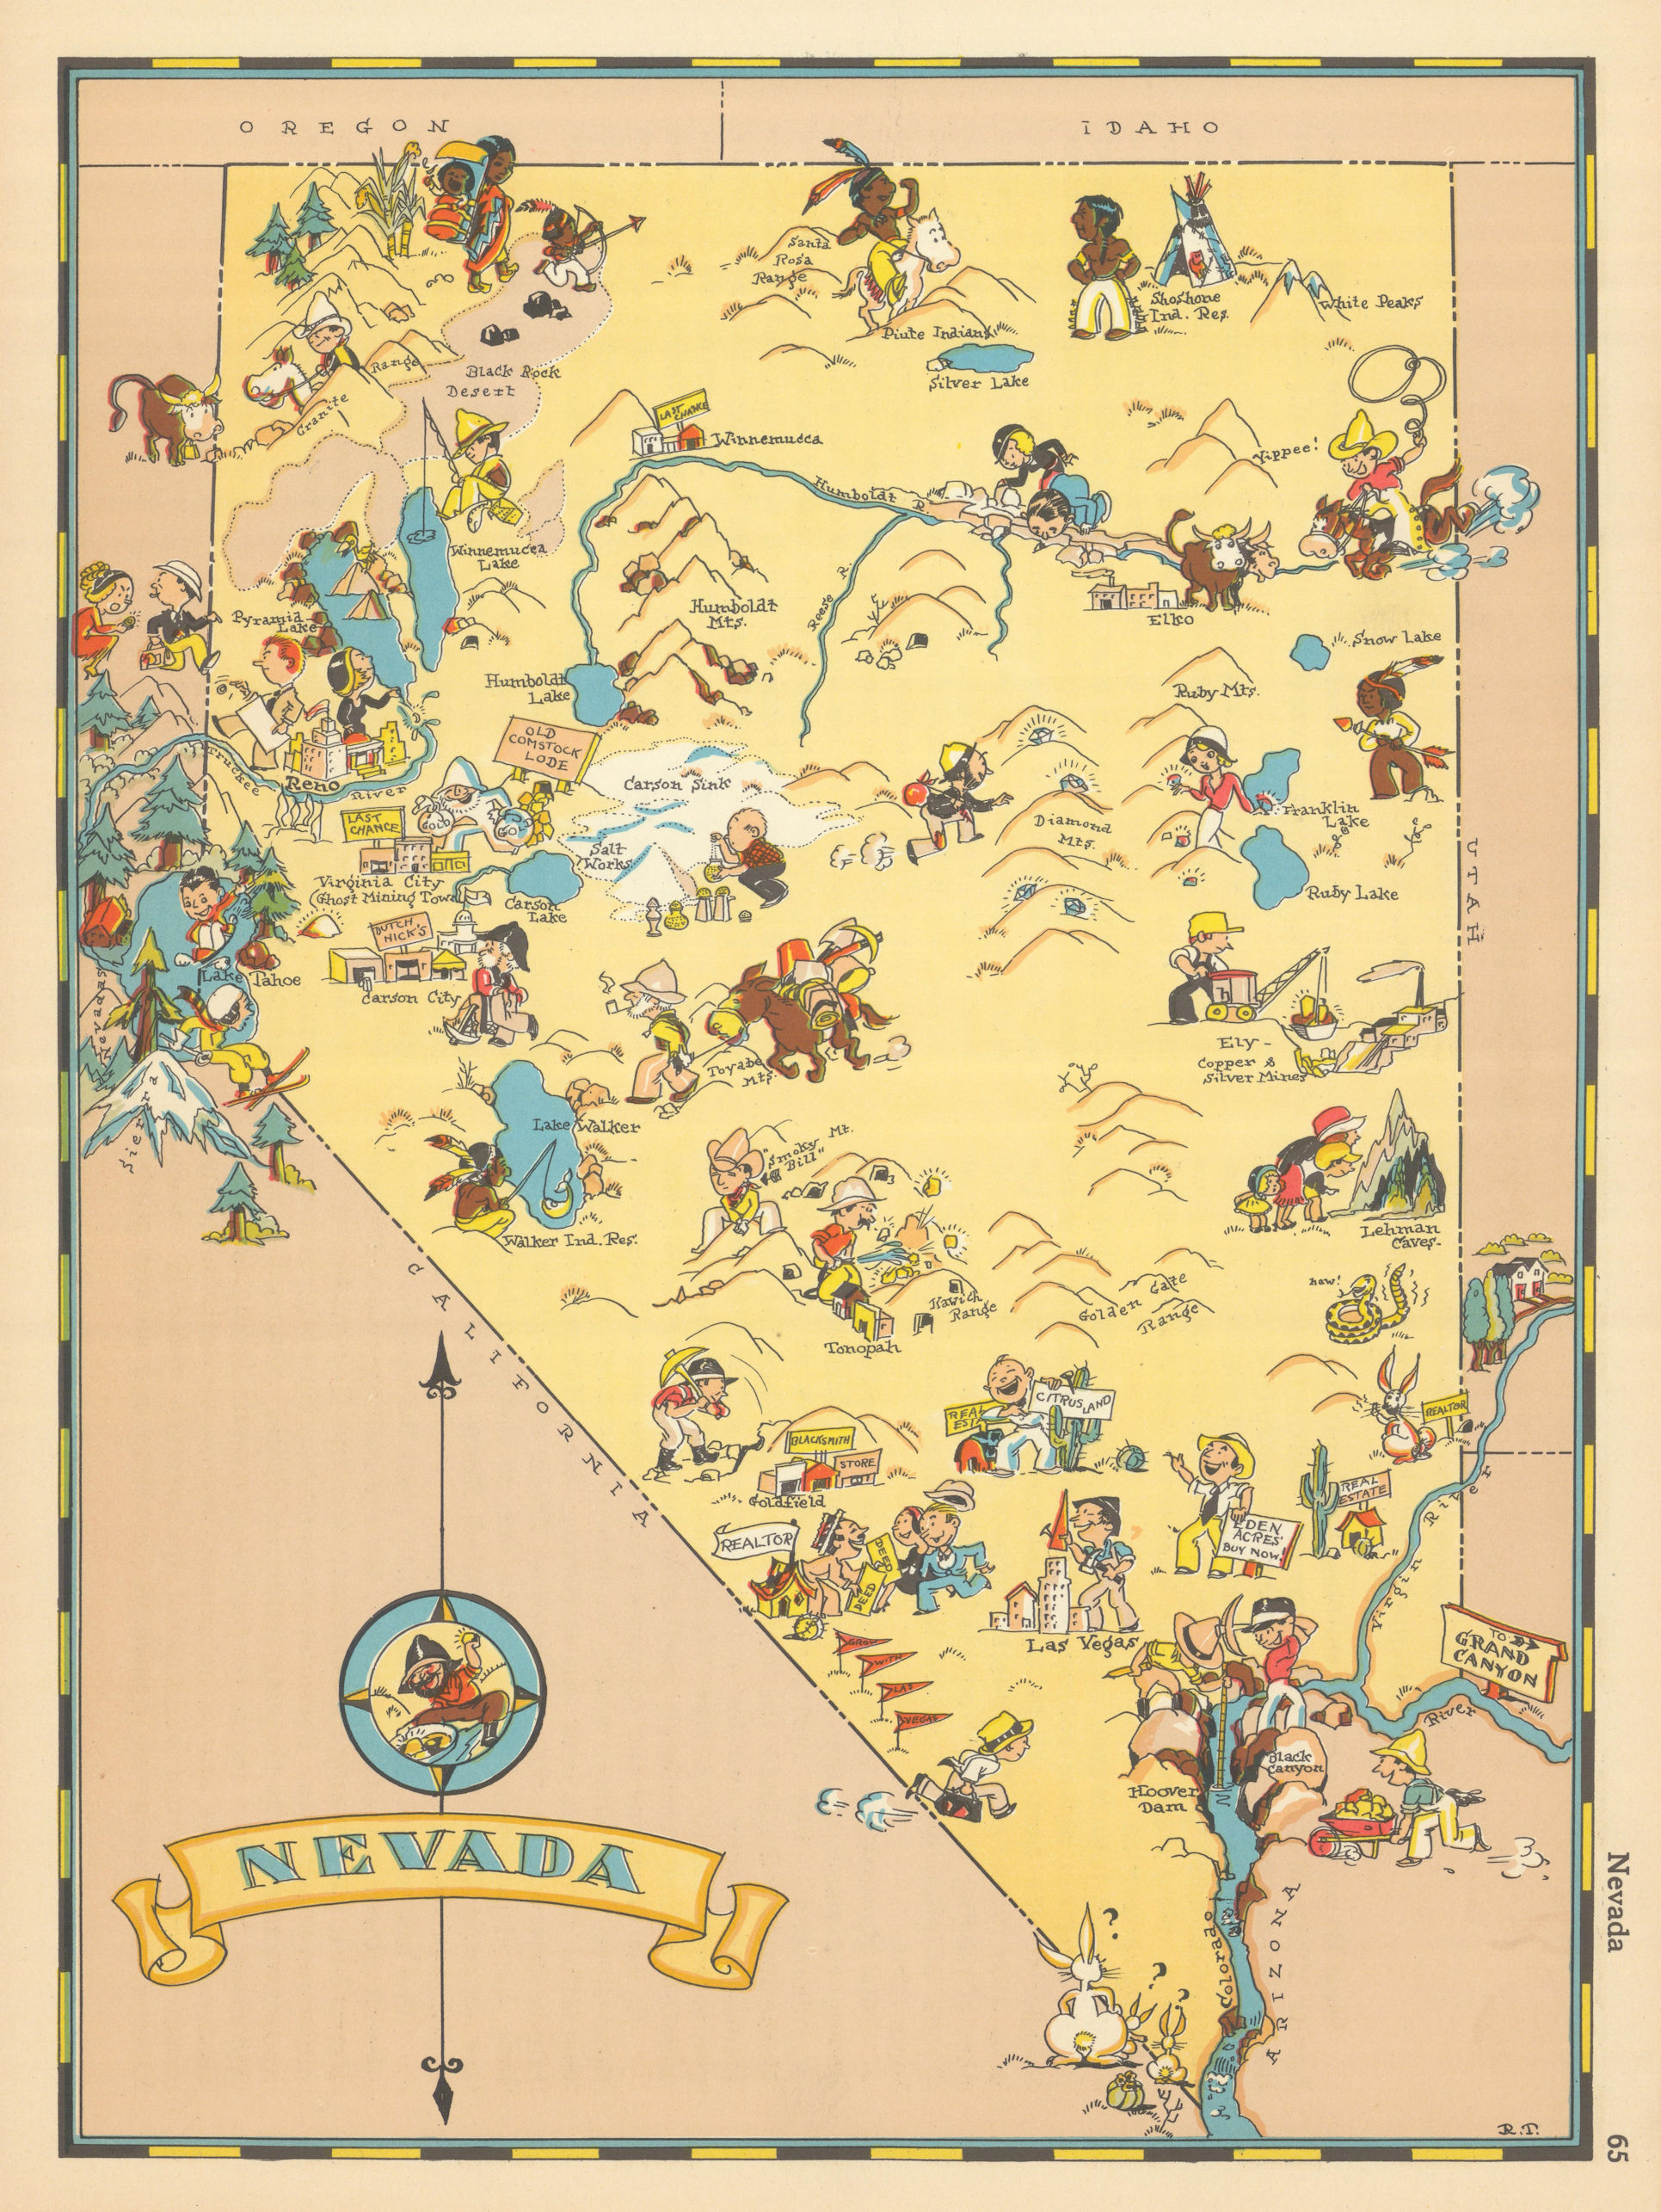 Associate Product Nevada. Pictorial state map by Ruth Taylor White 1935 old vintage chart